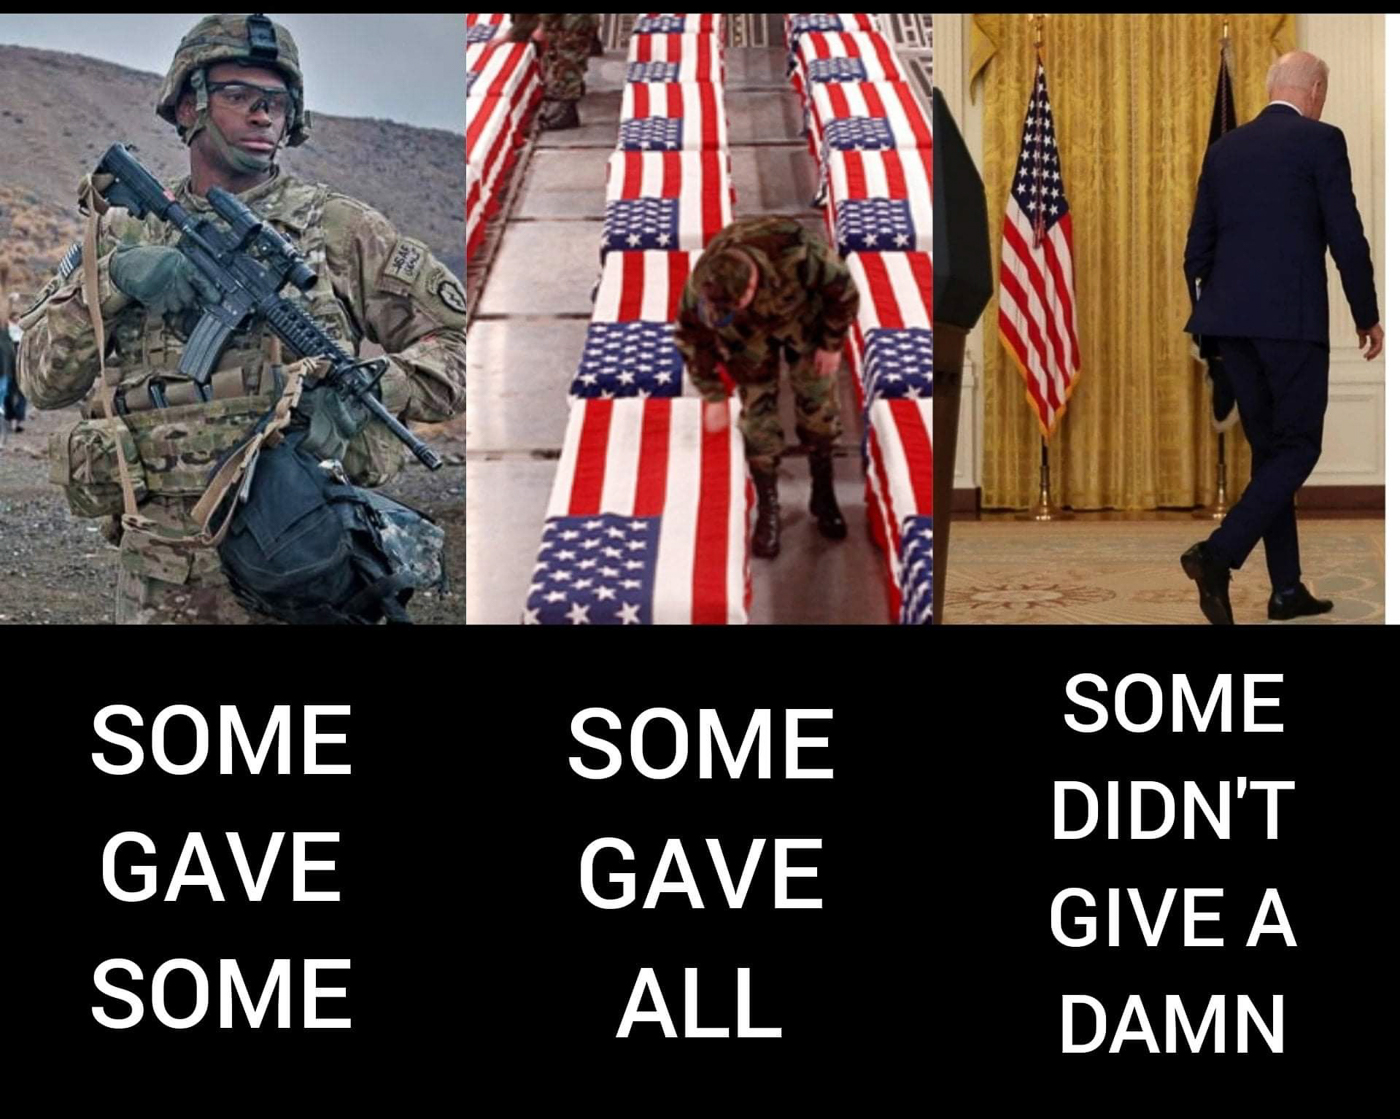 some gave some some gave all Biden did not give a damn  ~~  